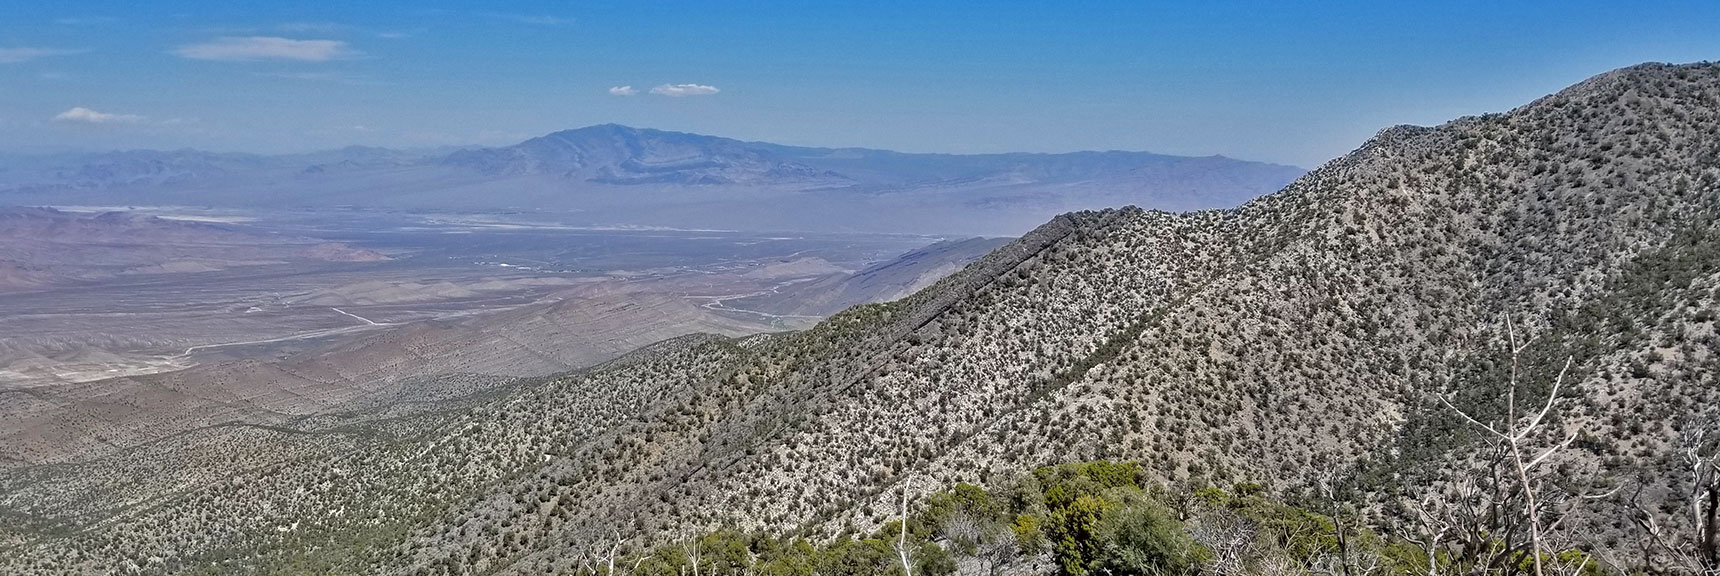 Sheep Range and Harris Springs Rd Viewed from Keystone Thrust Just West of El Padre Mountain, La Madre Mountains Wilderness, Nevada